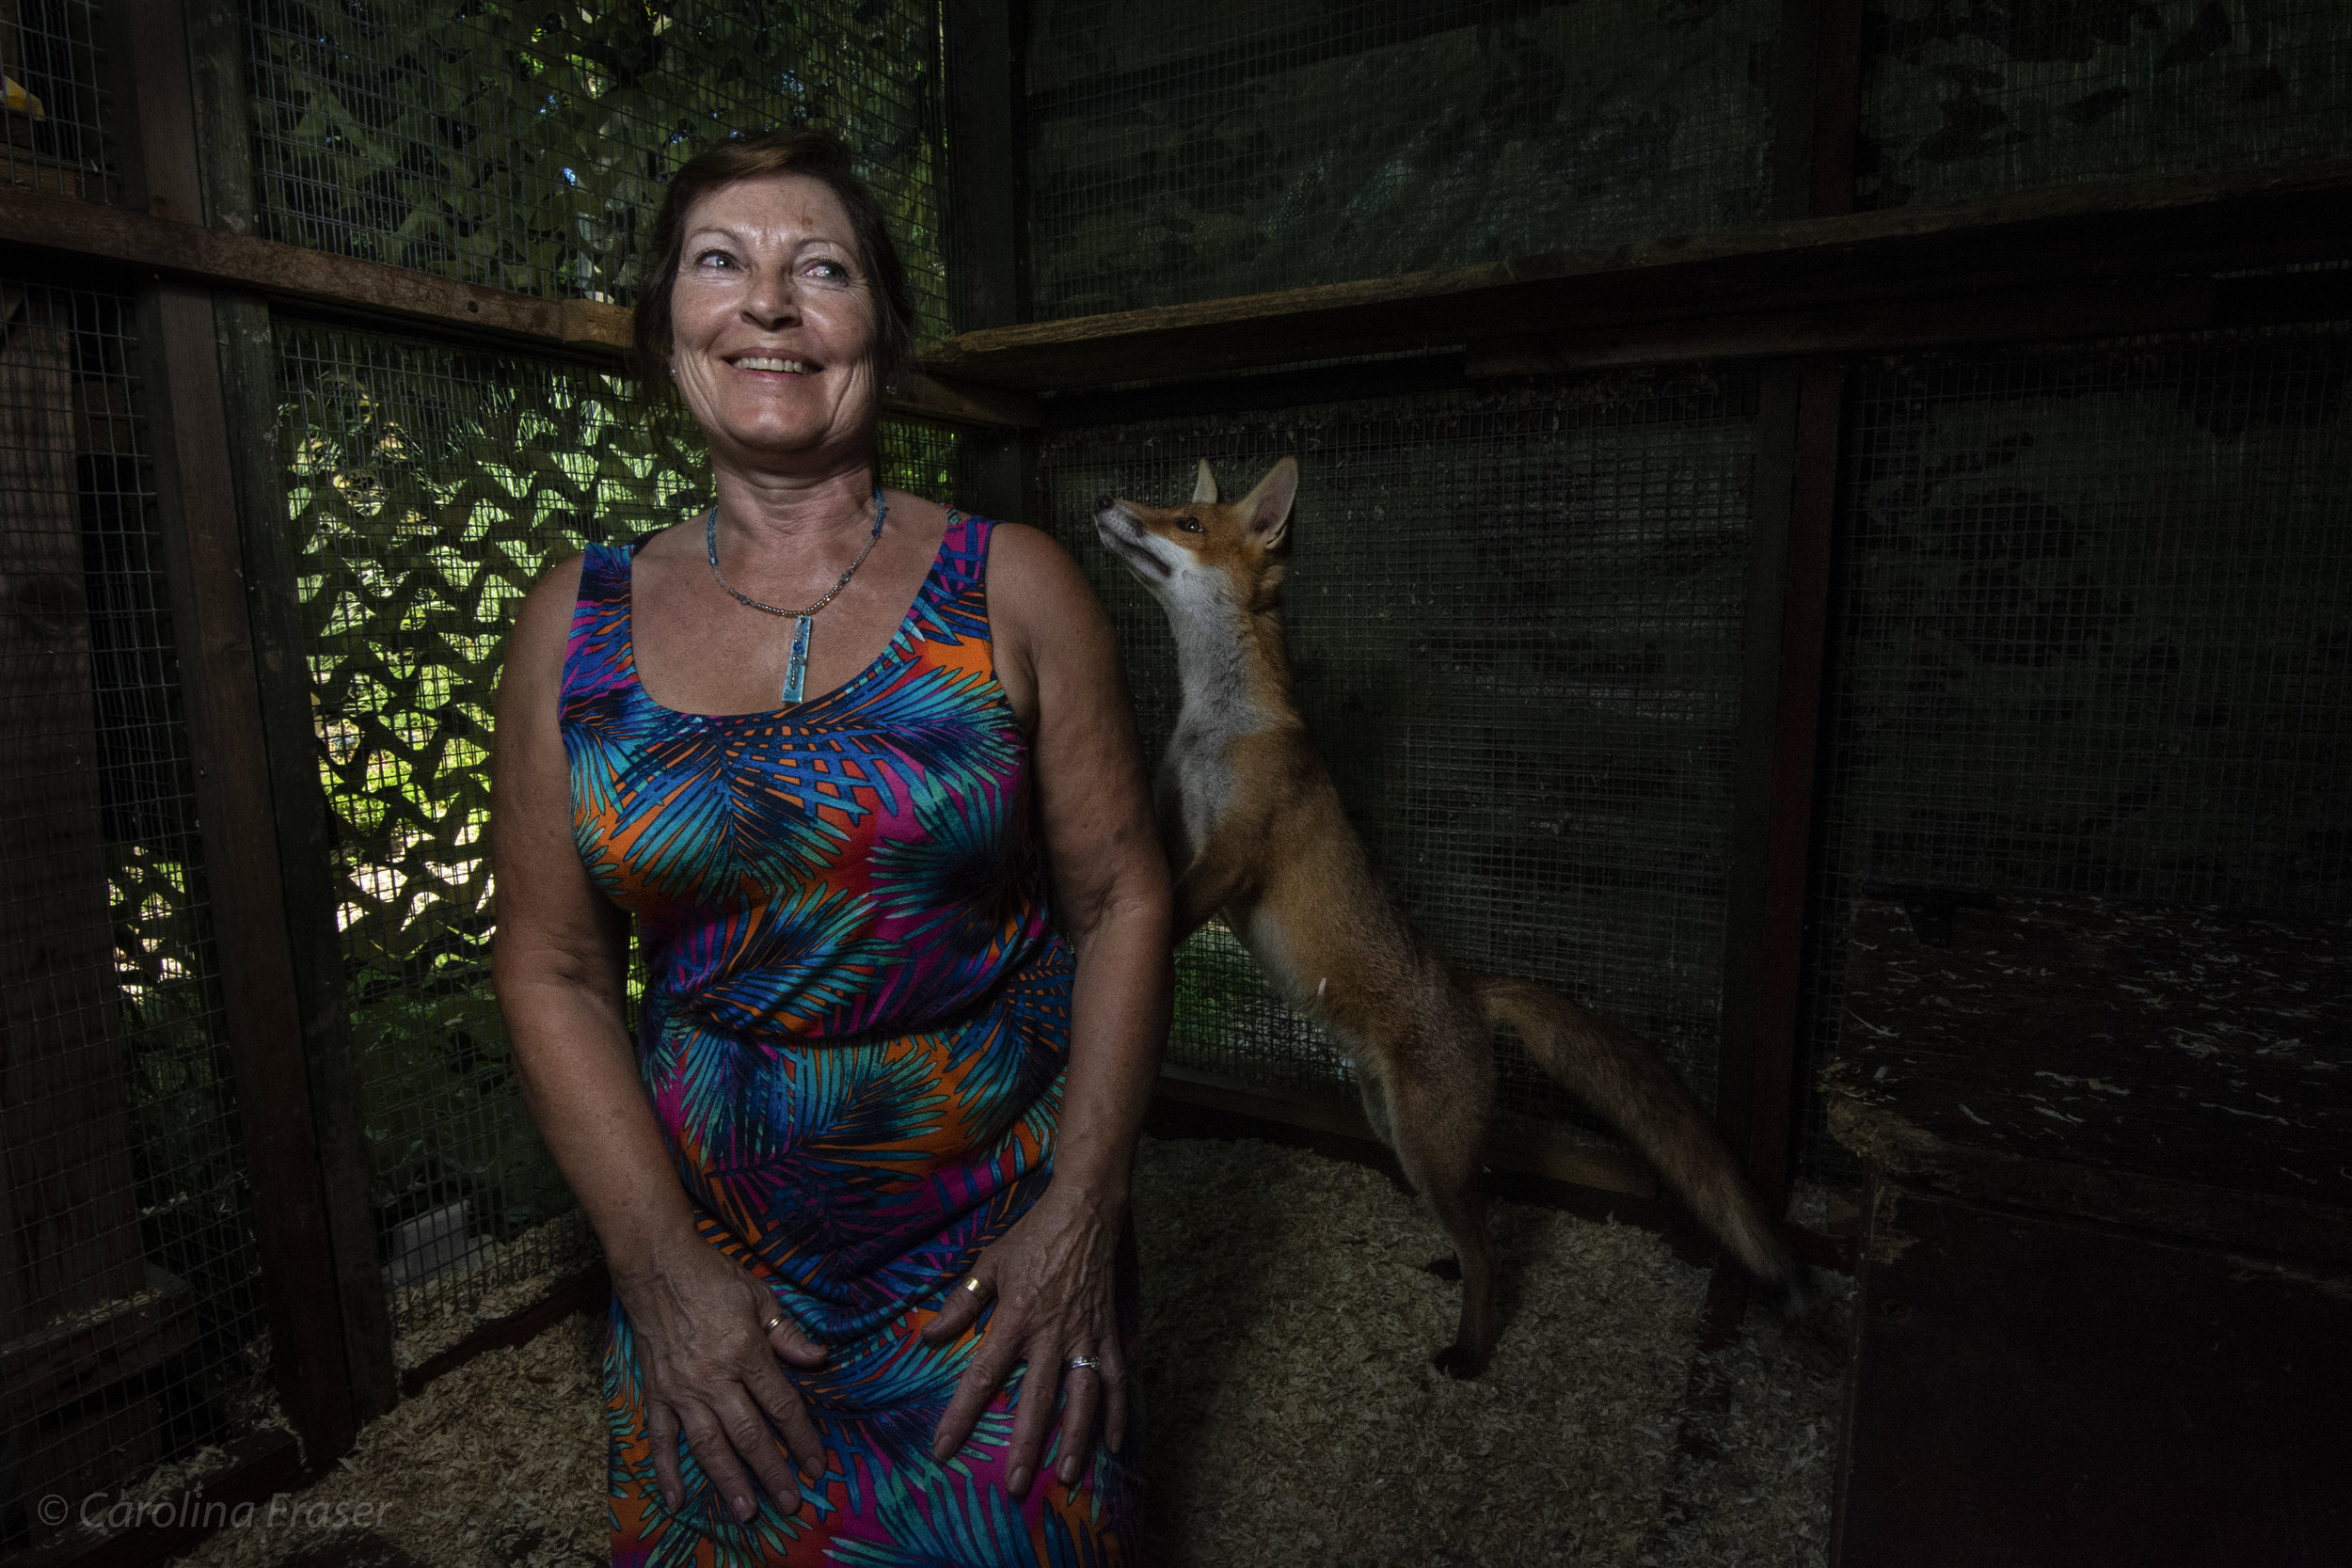  Rita Startup has been a fosterer for over twenty years, and has an enclosure in her garden. Sometimes one fox is more curious than others in the enclosure; especially if it’s a young fox. A friendly fox is not ideal. If a fox is too friendly, it wil